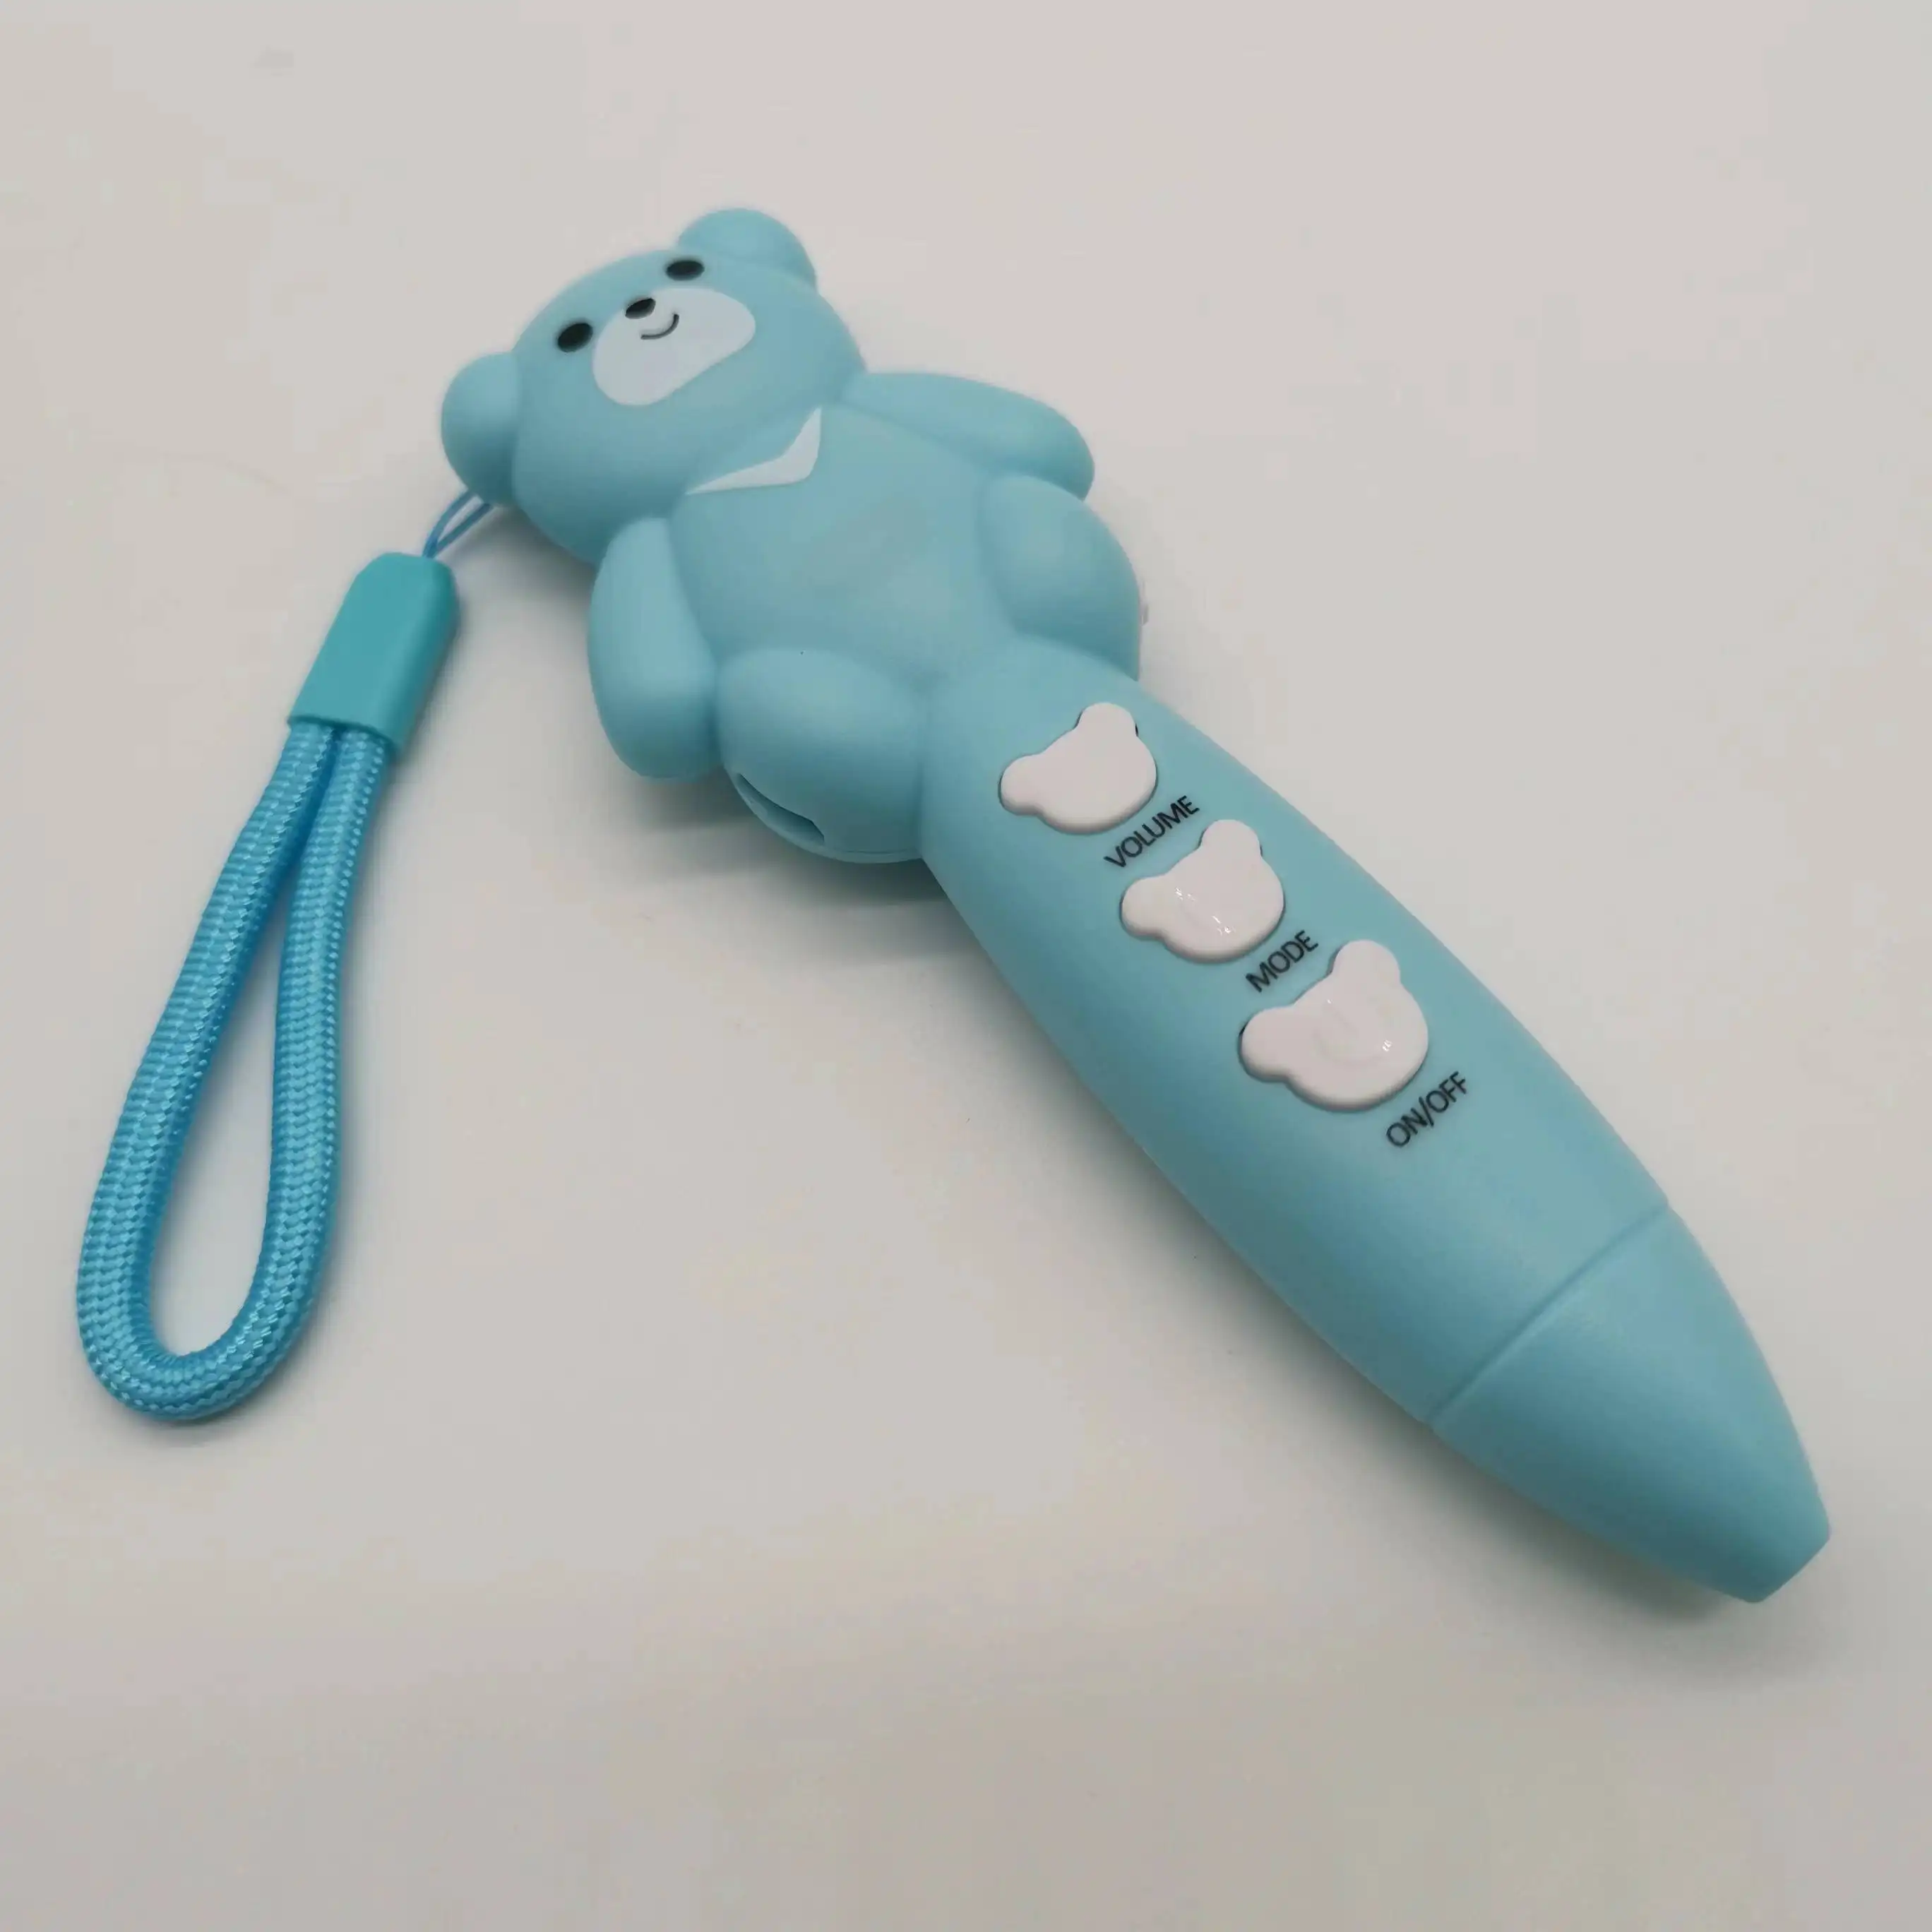 New arrival Little bear speaking sound voice pen teaching English Chinese Spanish French Italian story books learning toy